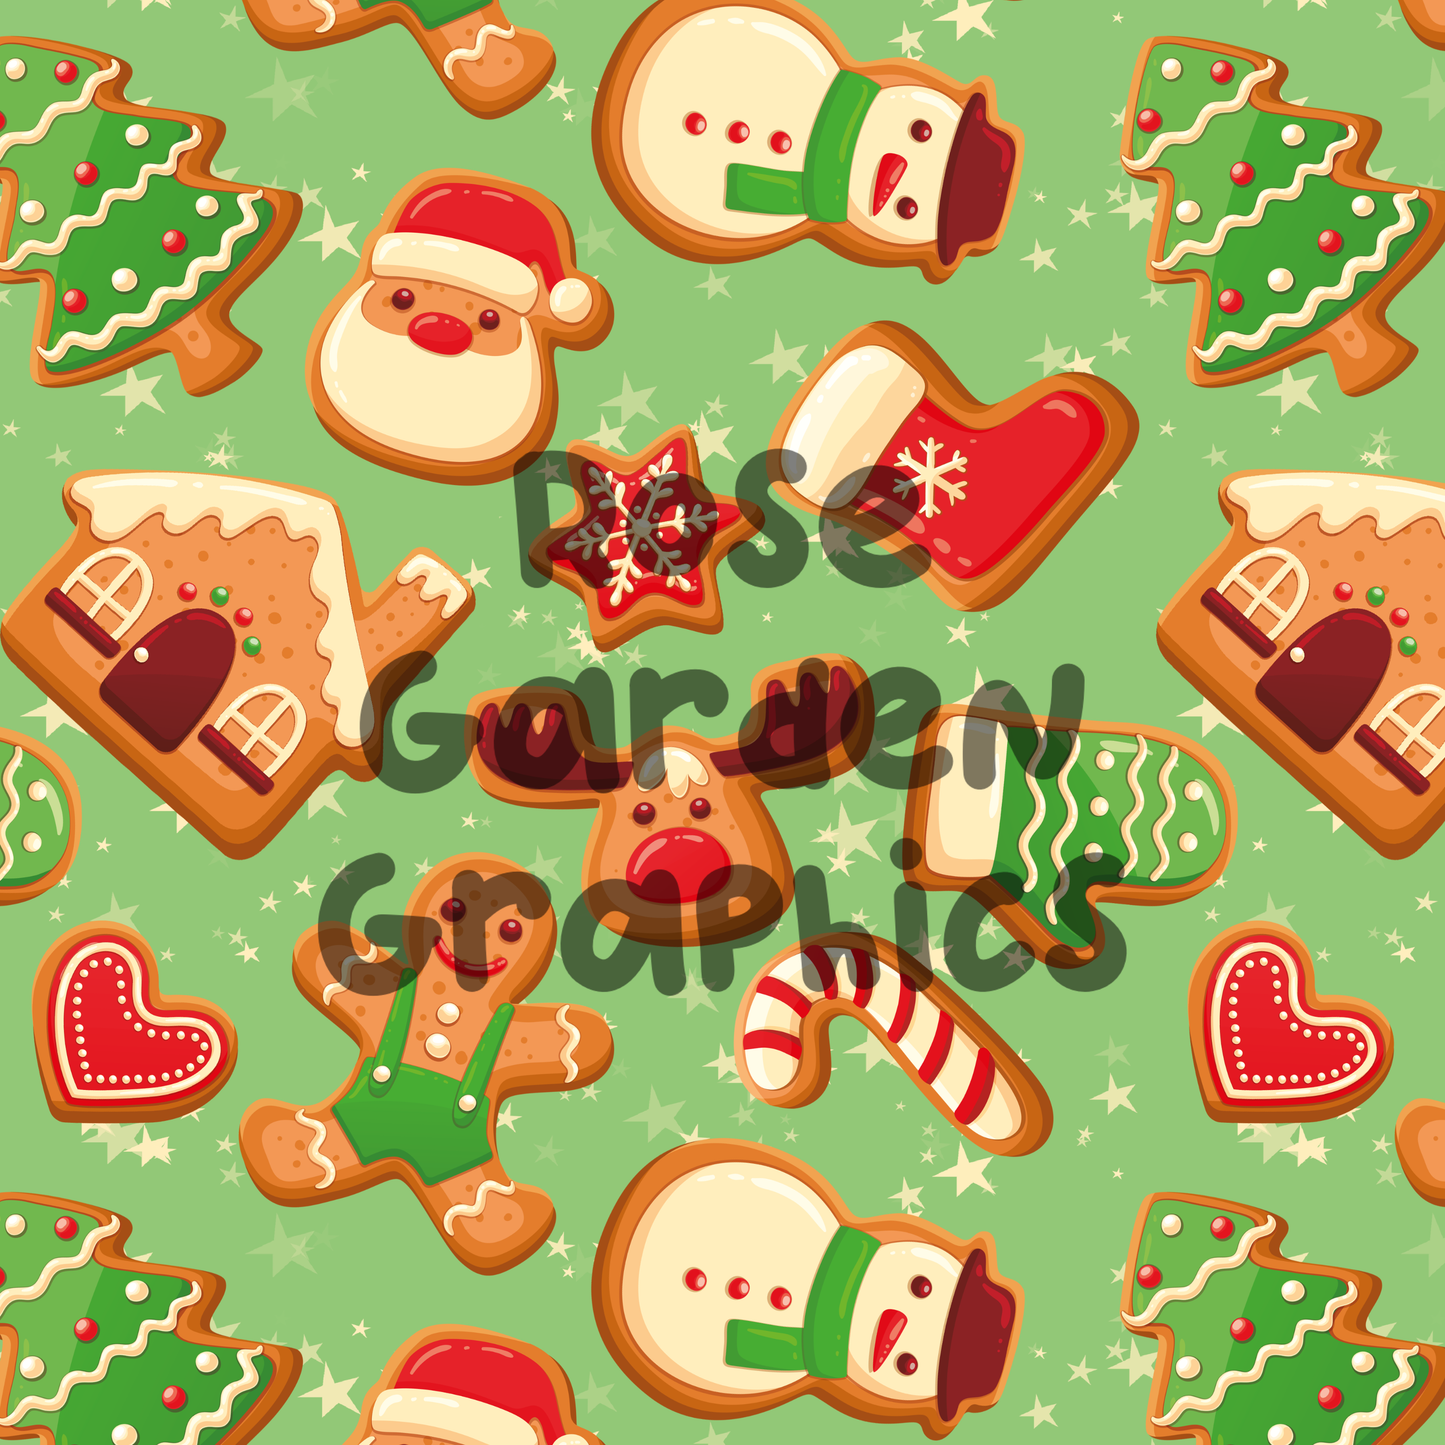 Gingerbread Buddies 2 Seamless Images